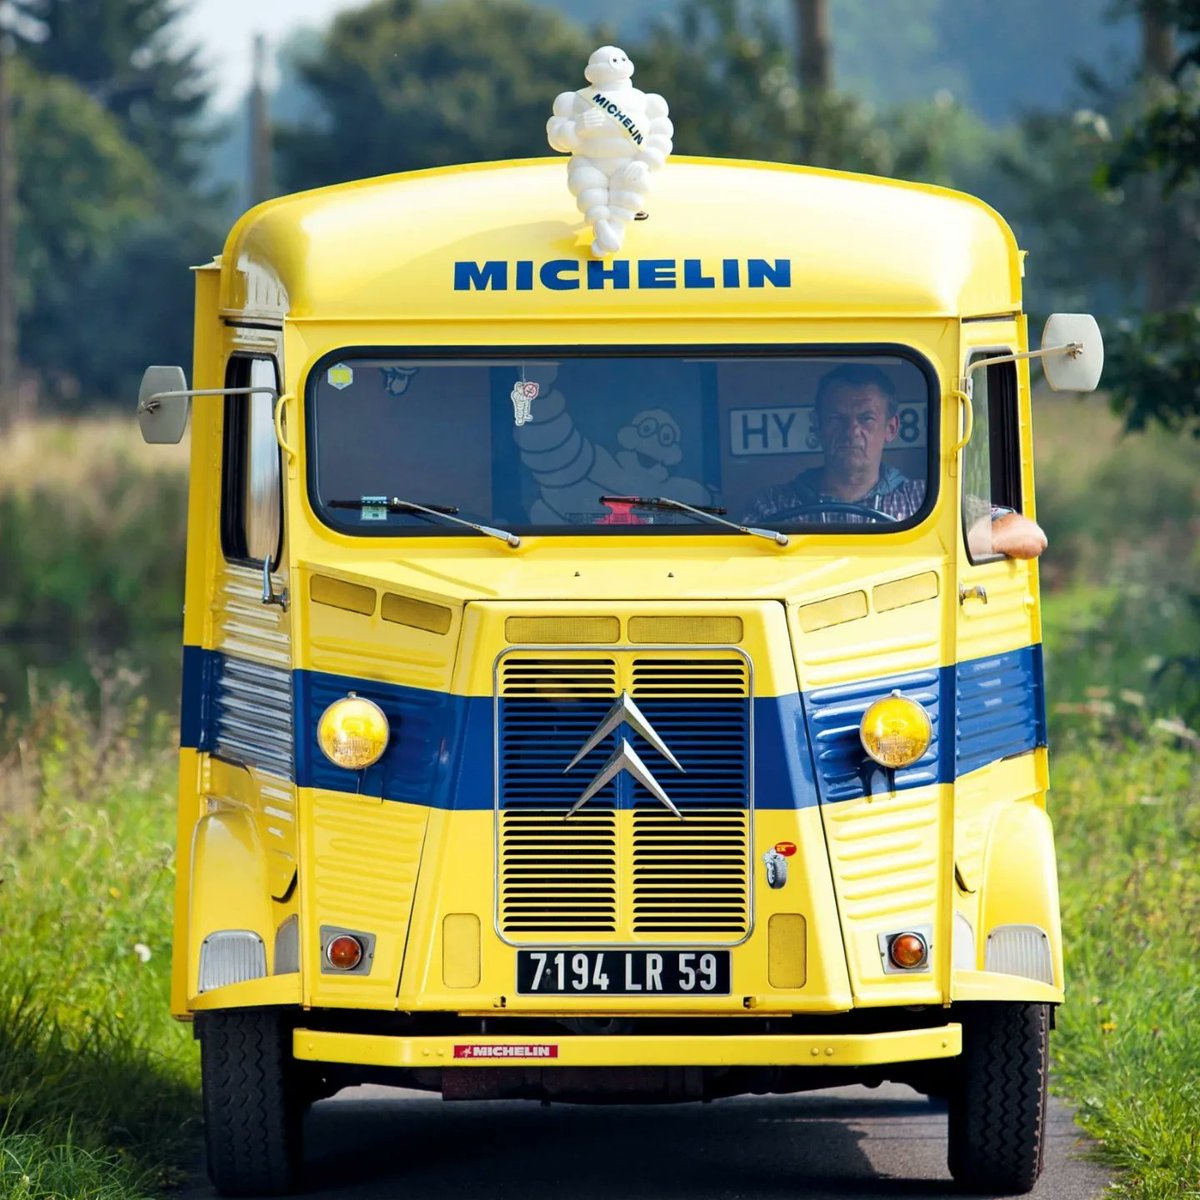 1981 Citroën HY IN2 : Michelin Express 💛💙💛 🇨🇵 #classic #vehicle